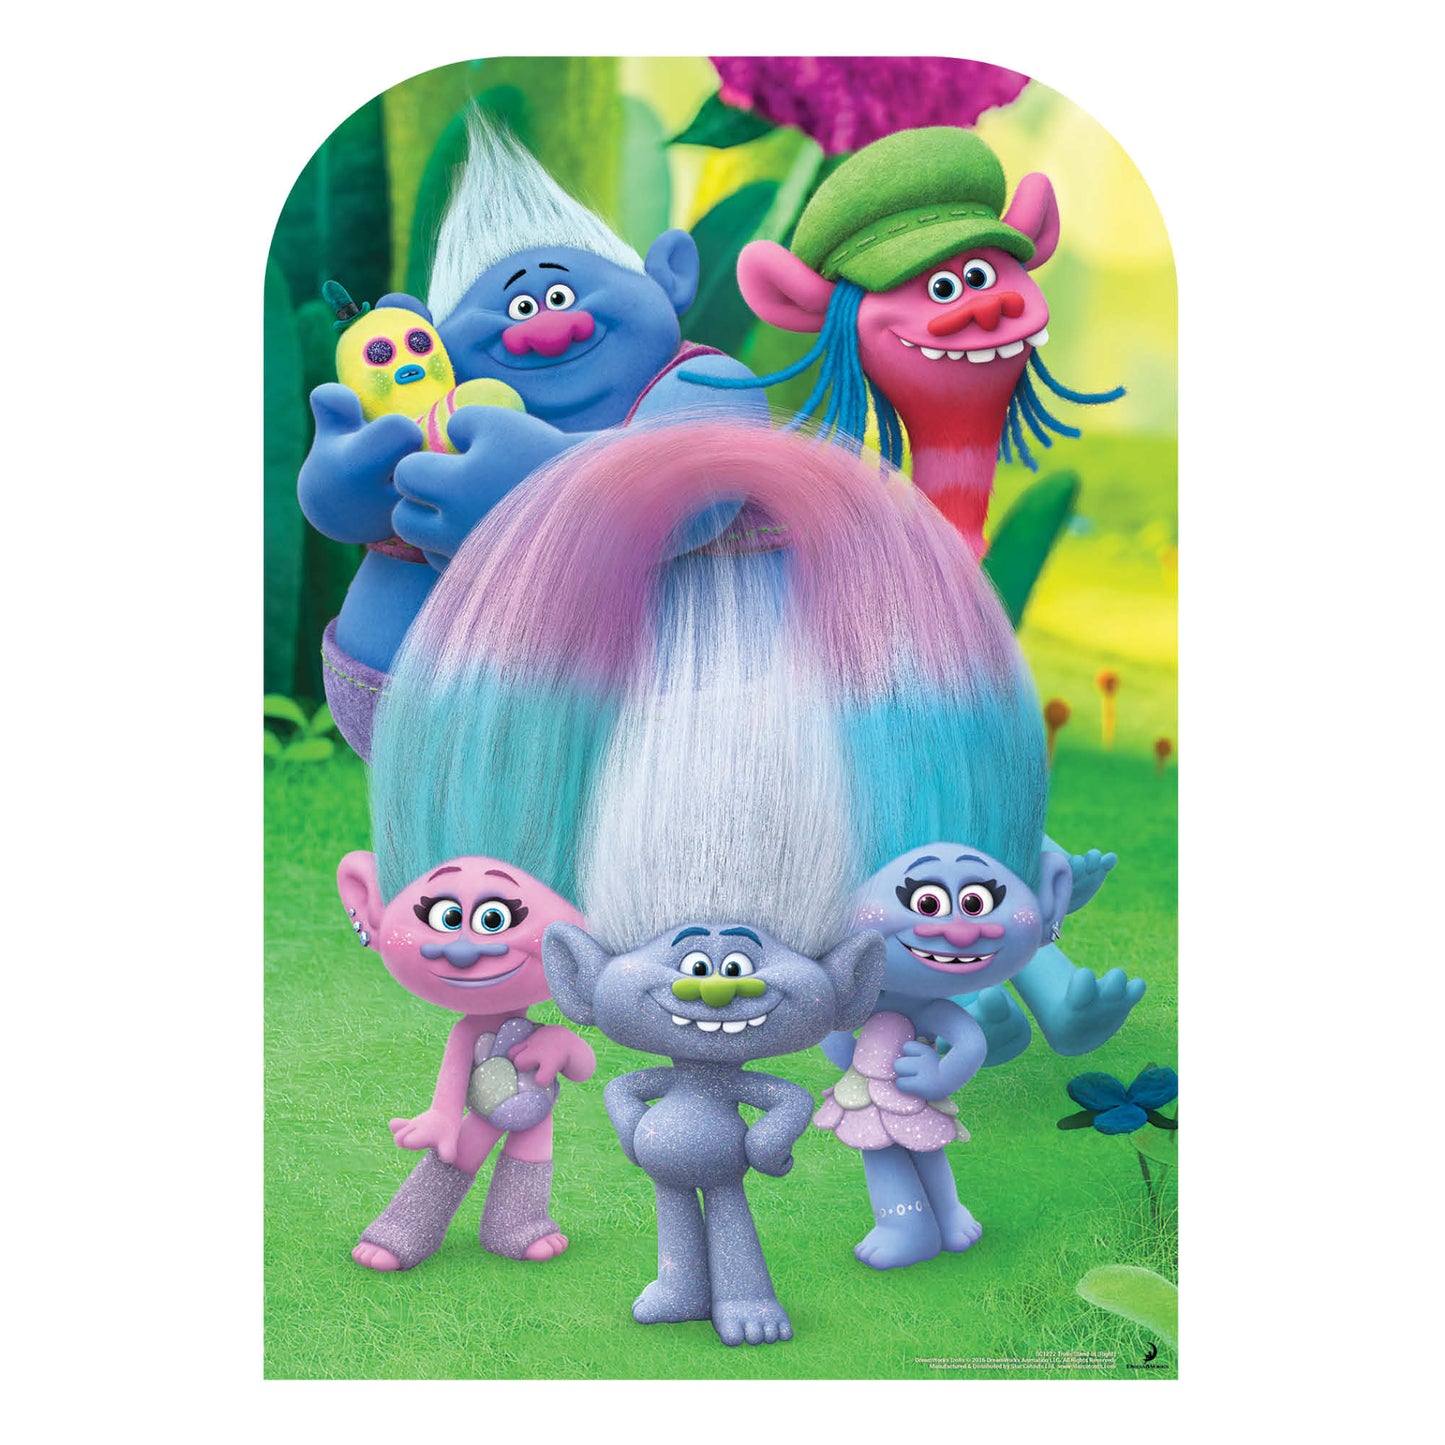 Trolls Stand-In (Can't Stop the Feeling Right) Cardboard Cutout